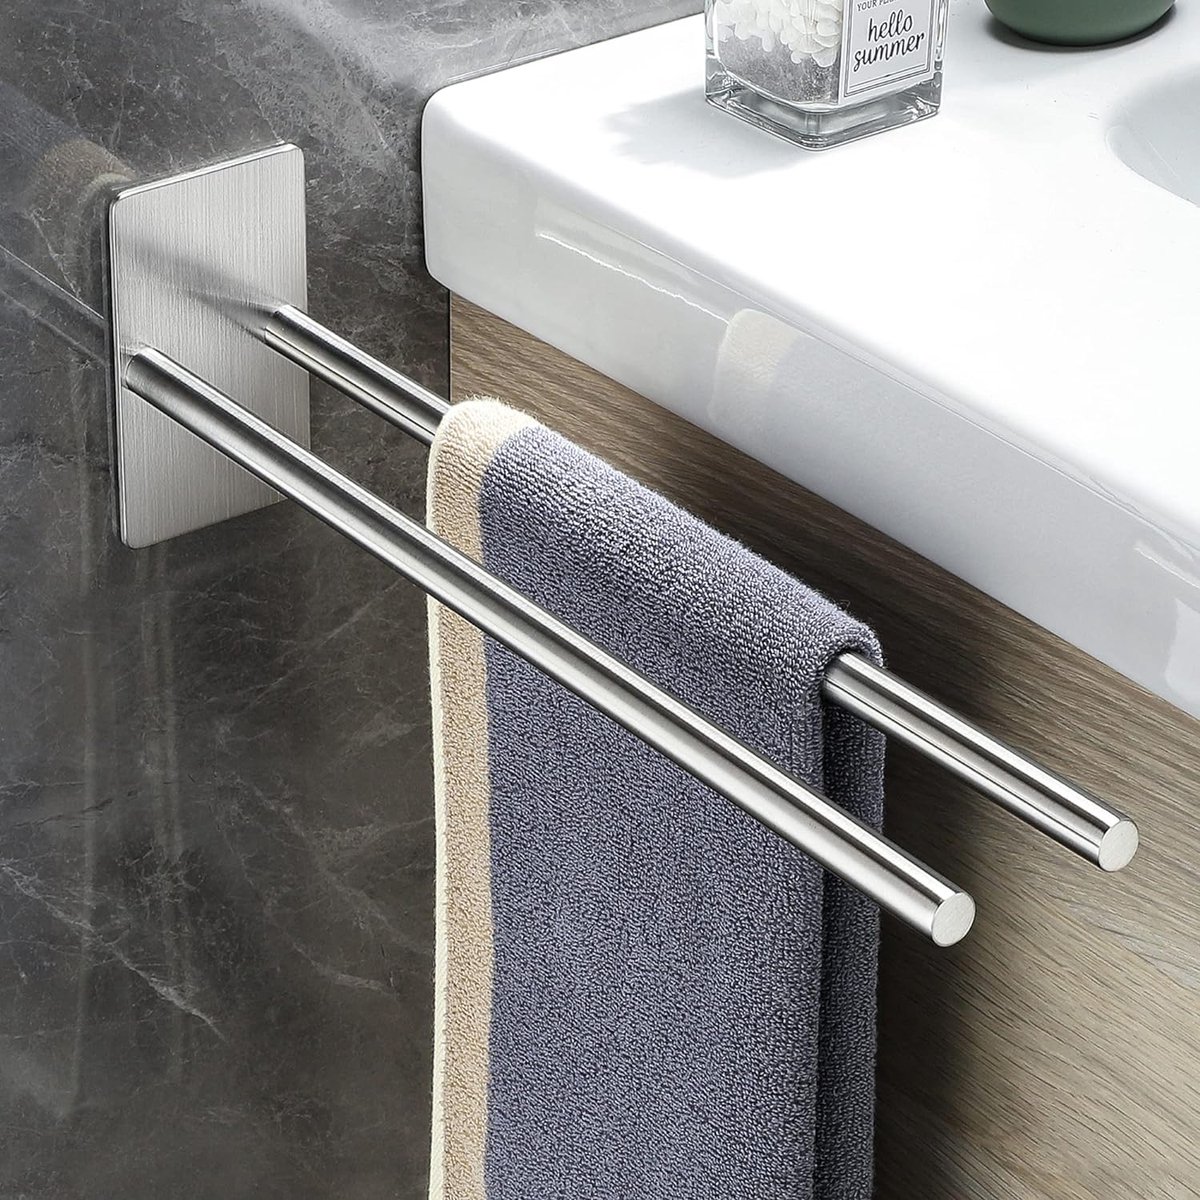 Towel Rail Double Arm 304 Stainless Steel Towel Rail Self-Adhesive Towel Rail Double No Drilling Bath Towel Holder for Bathroom Kitchen Wall Silver 38 cm